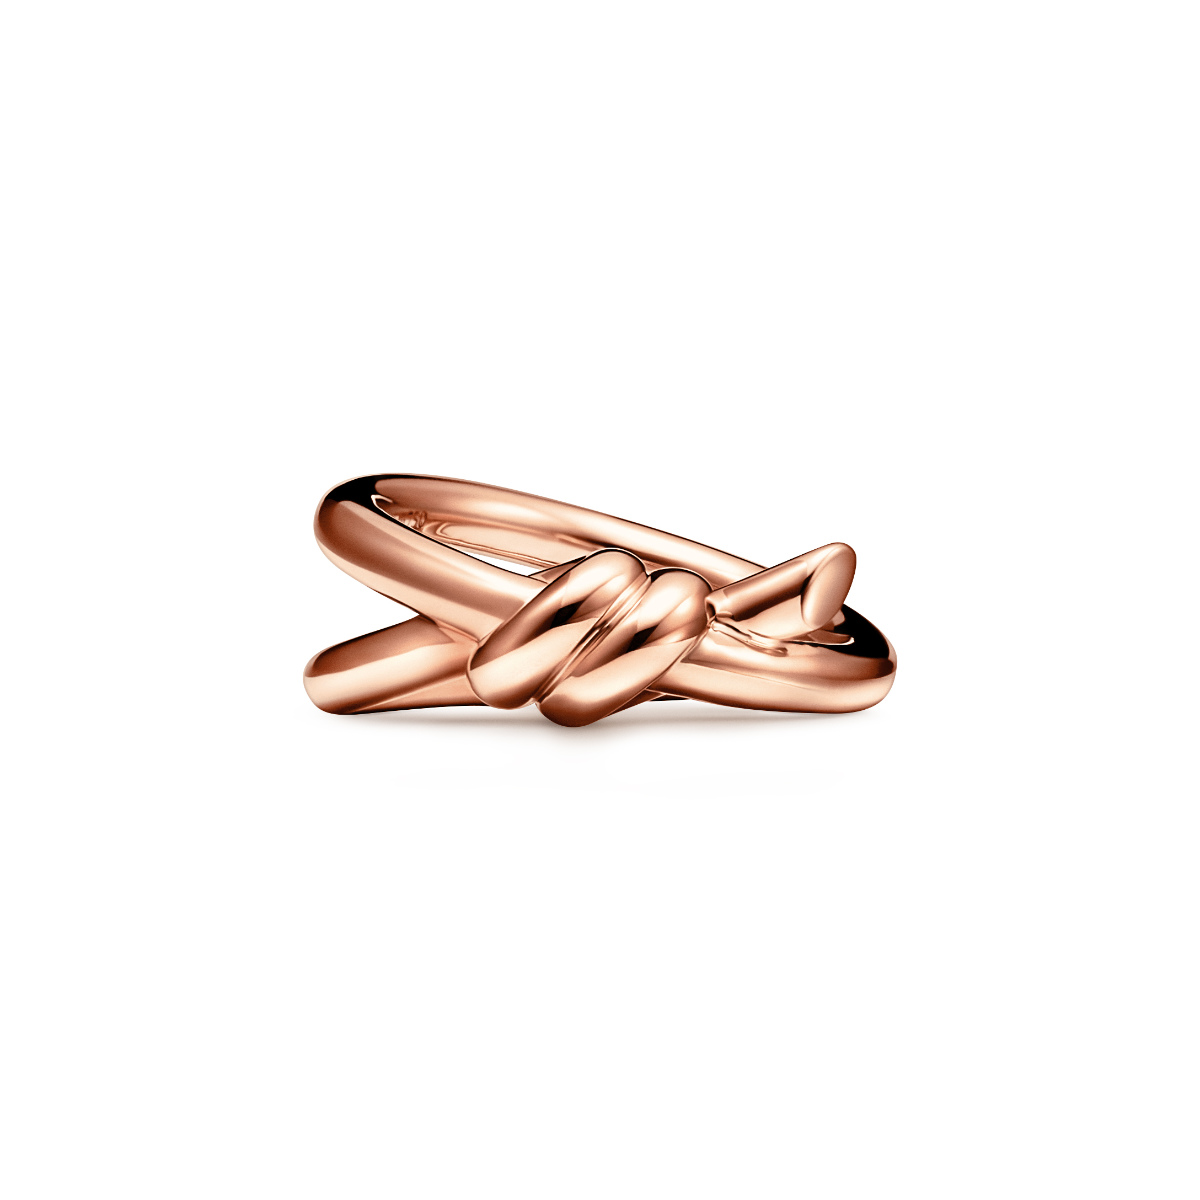 Tiffany & Co. Launches The New Tiffany Knot Collection